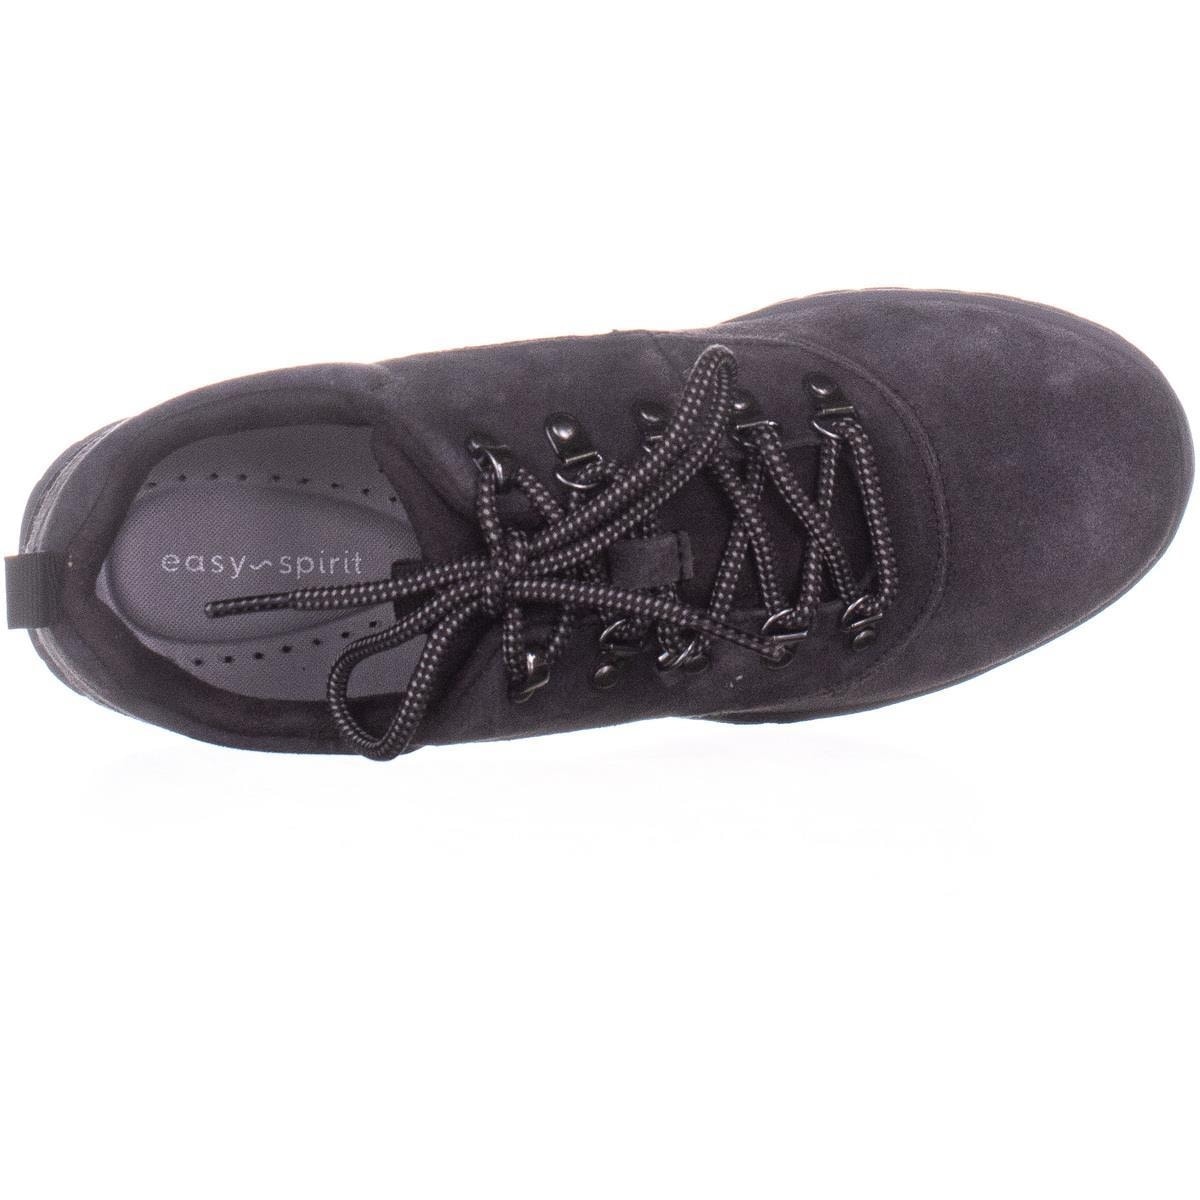 easy spirit chilly sneakers